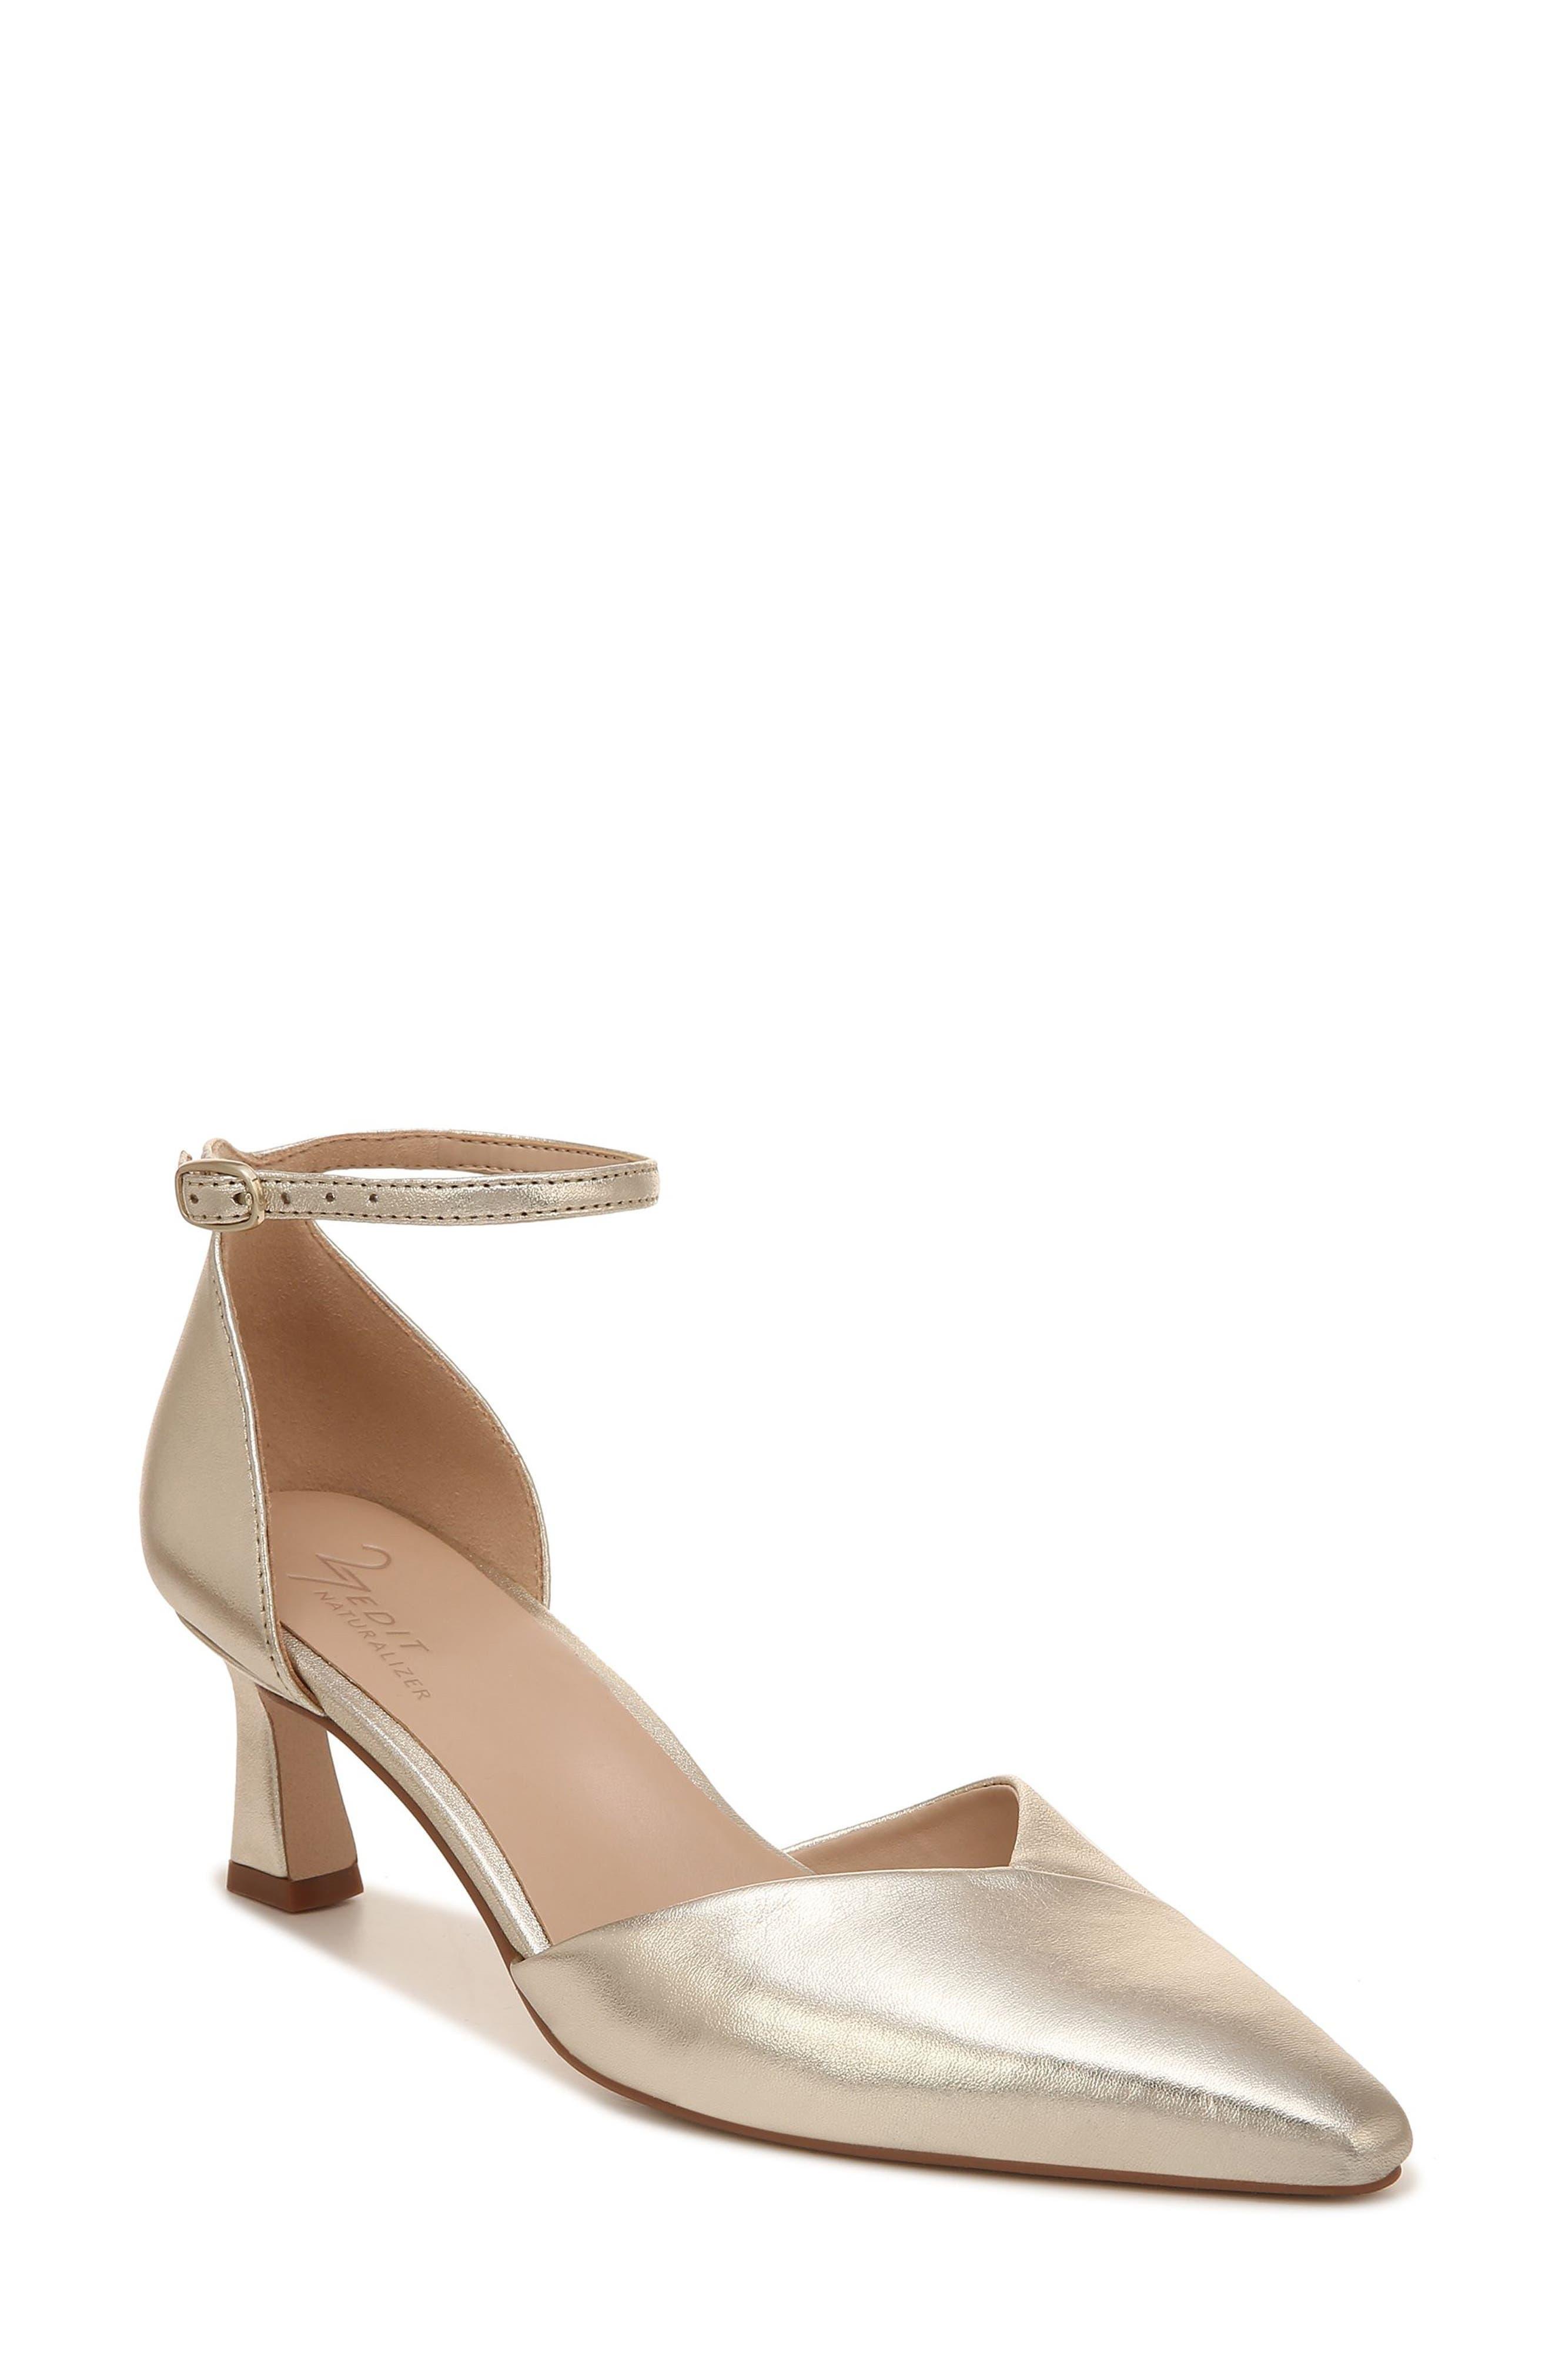 27 EDIT Naturalizer Danica Ankle Strap Pointed Toe Pump | Lyst